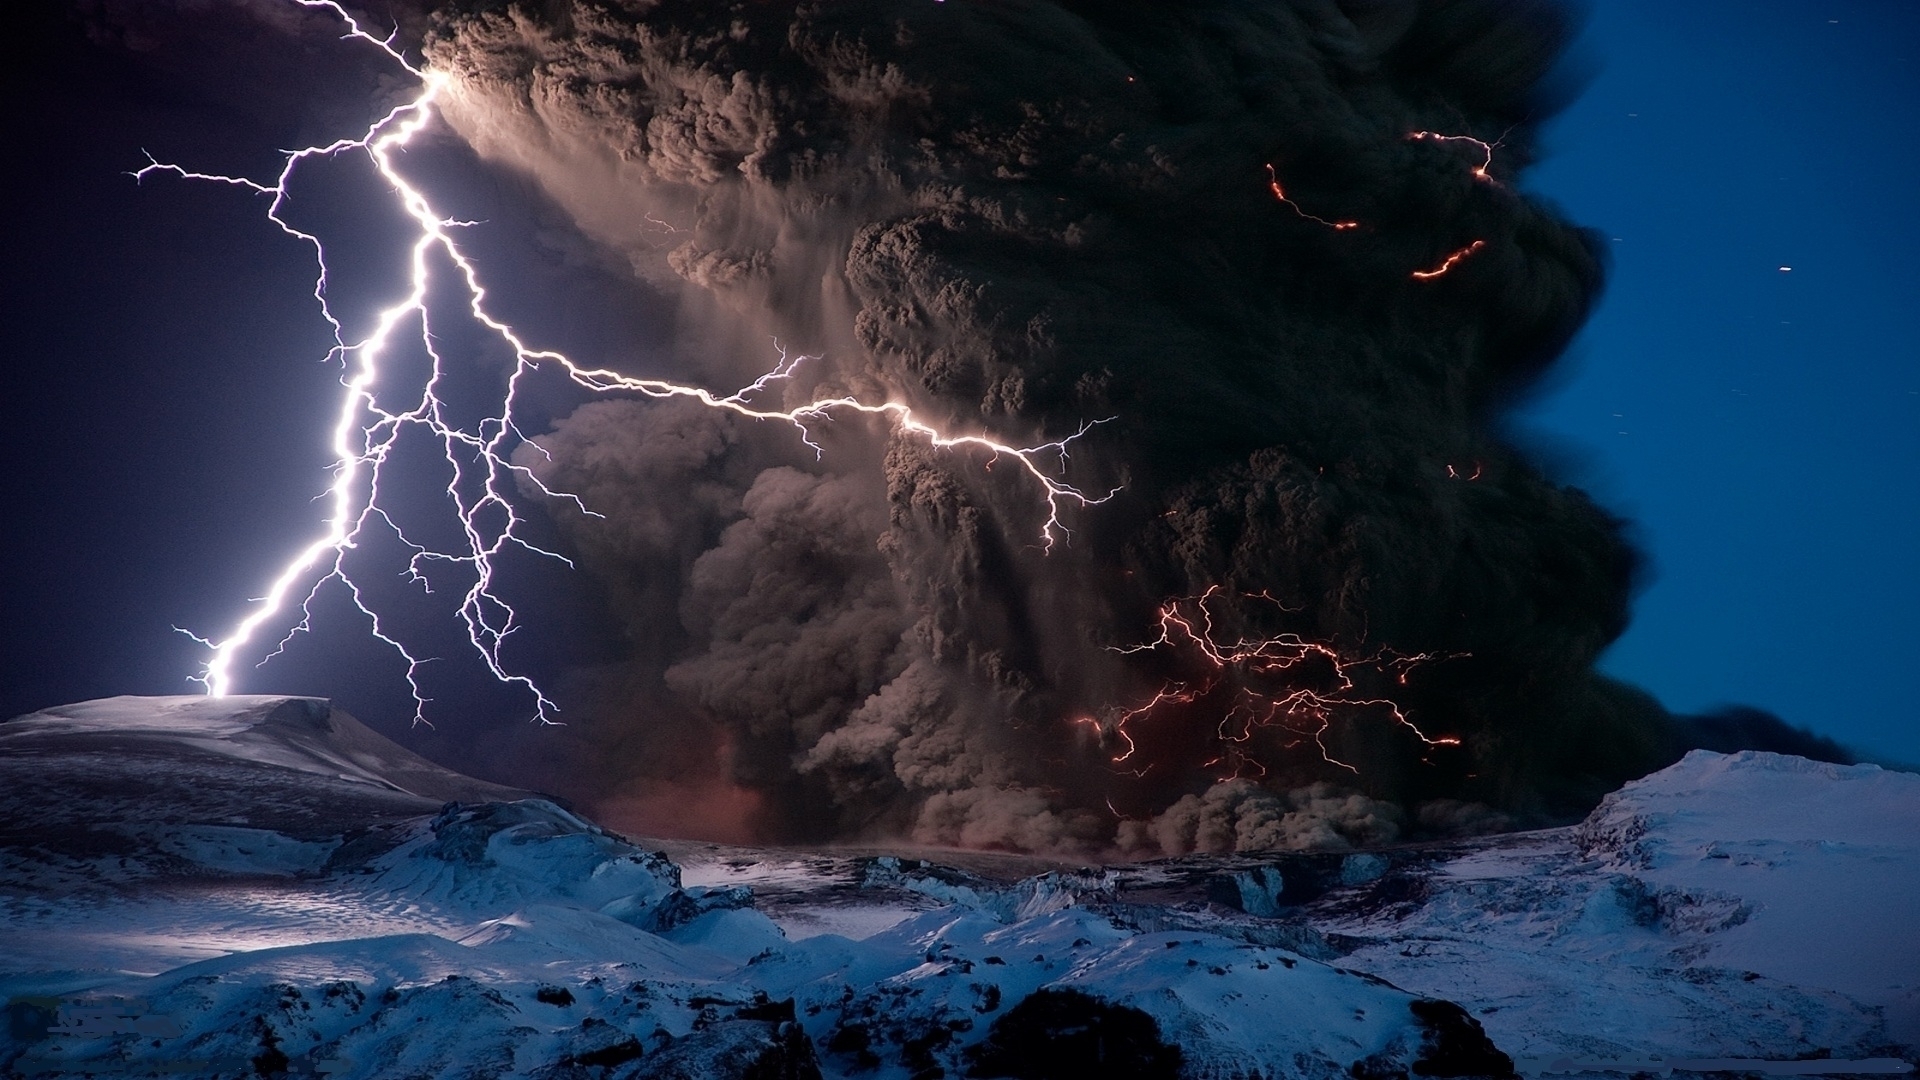 Free download Thunder Lightning On A Snowny Mountain [1920x1080] for